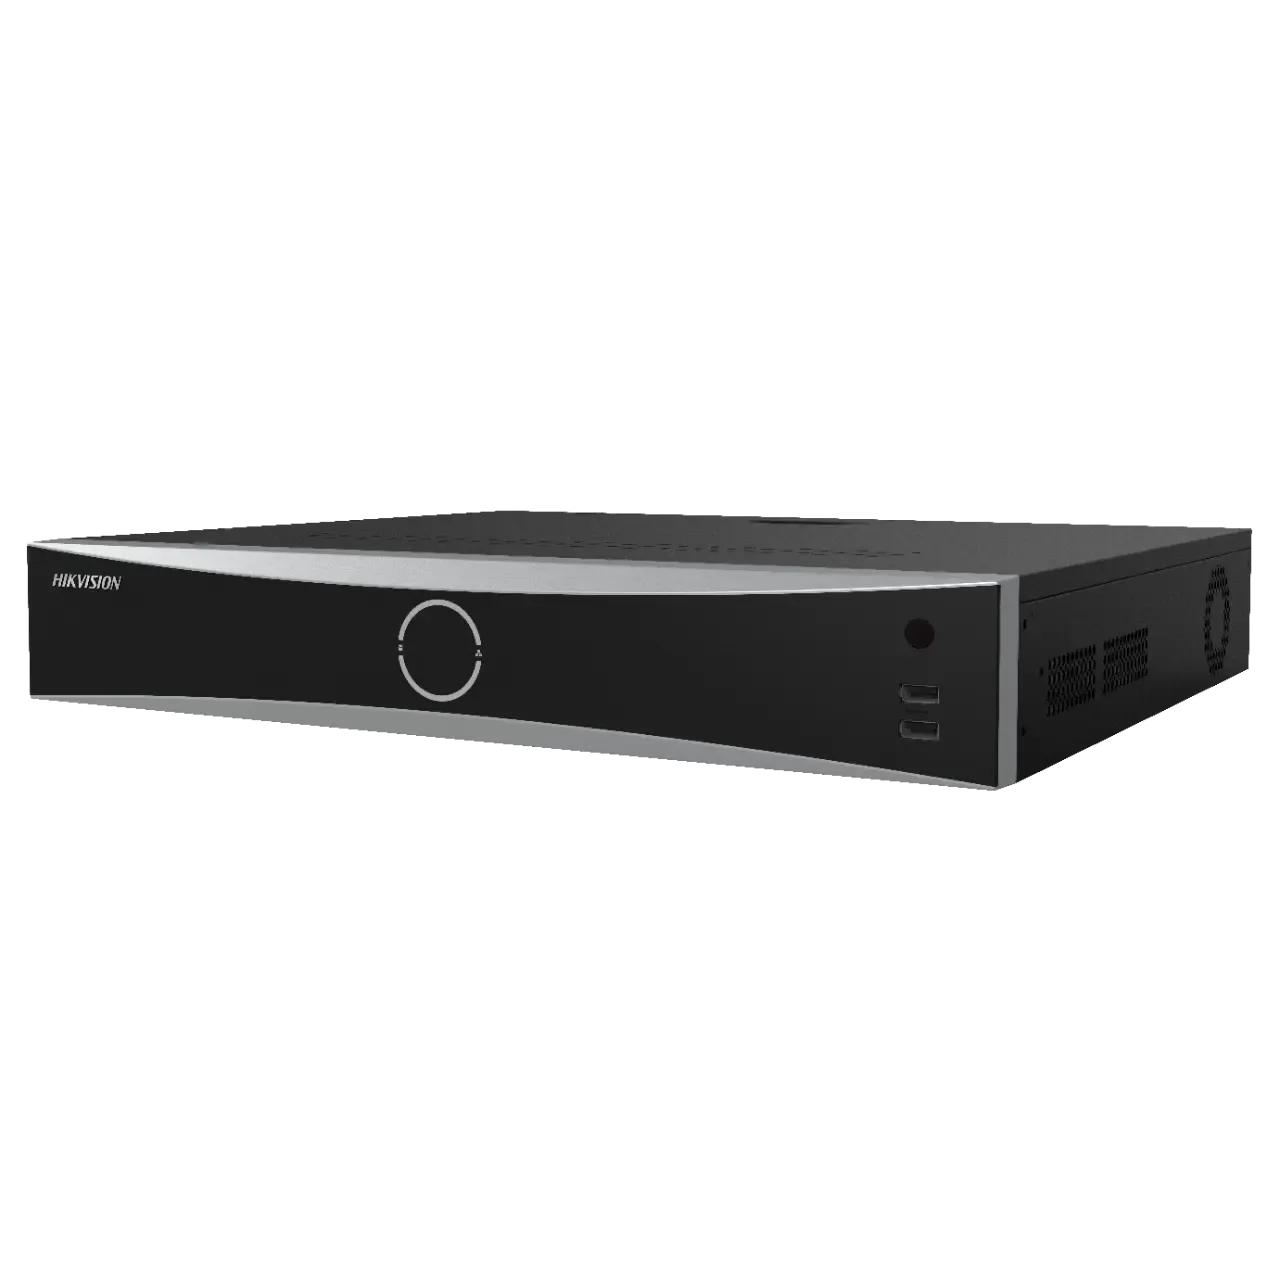 Nvr hikvision ds-7716nxi-k4/16p 16 canale